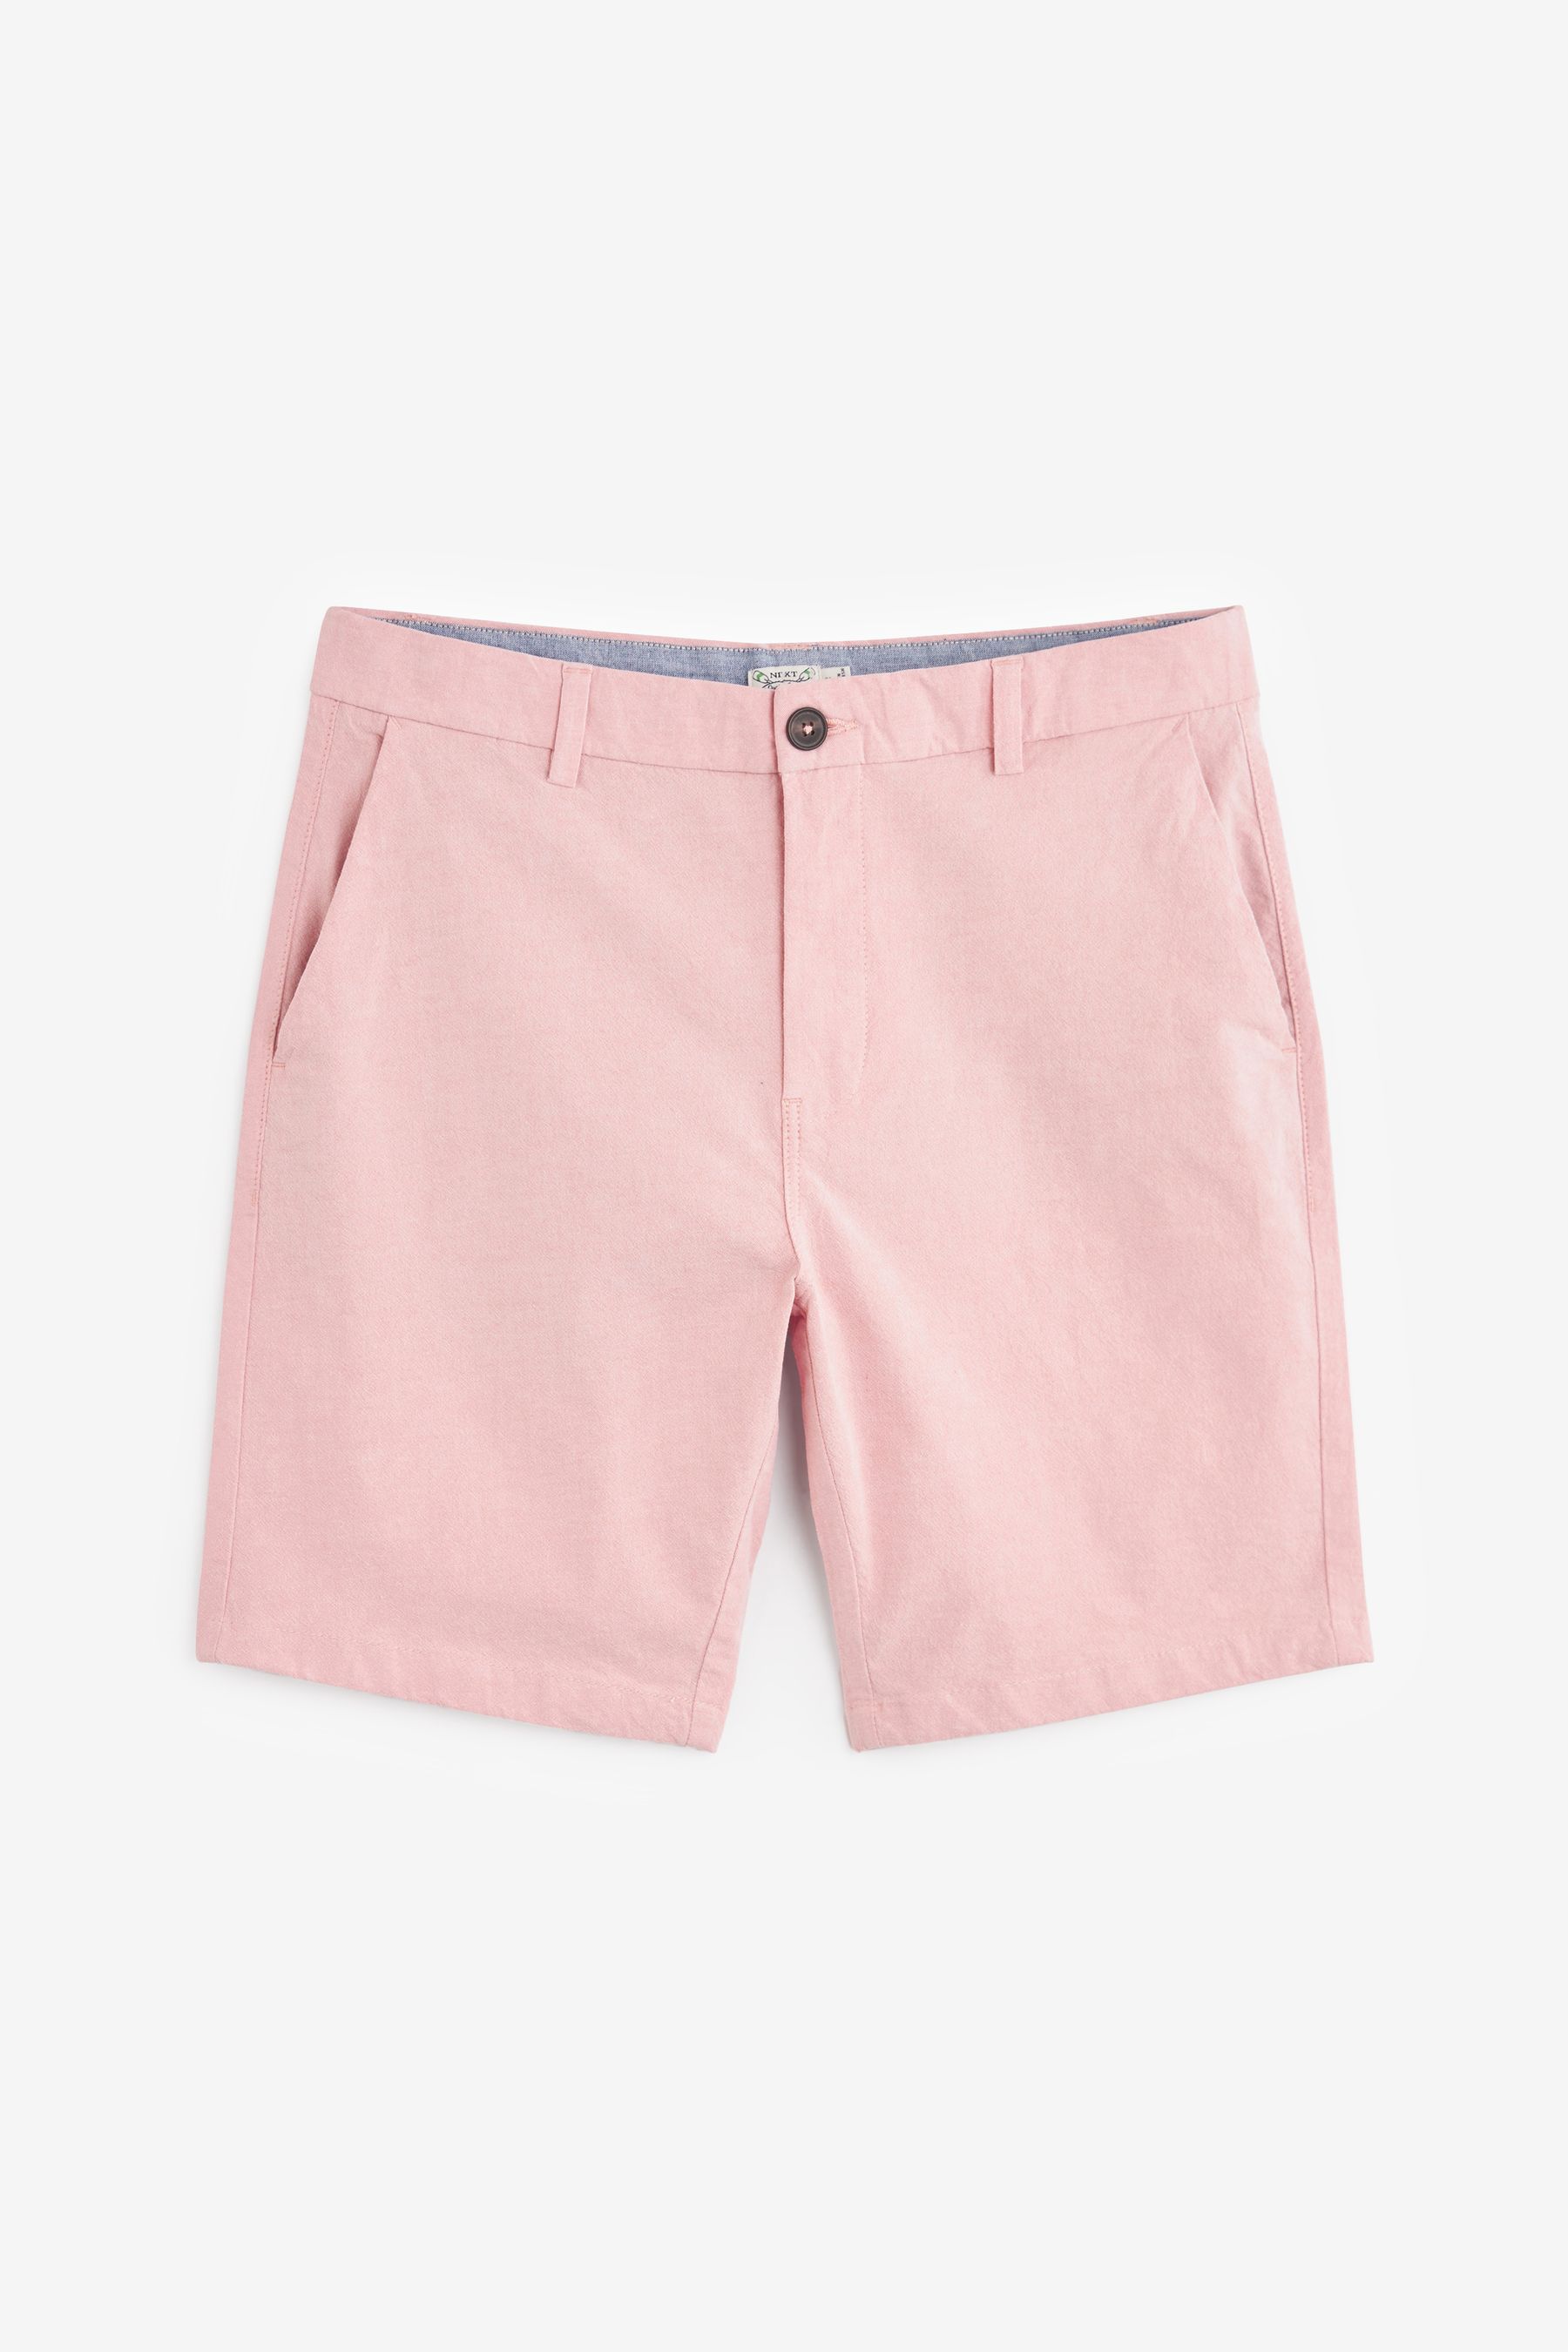 Buy Stretch Chino Shorts from the Next UK online shop